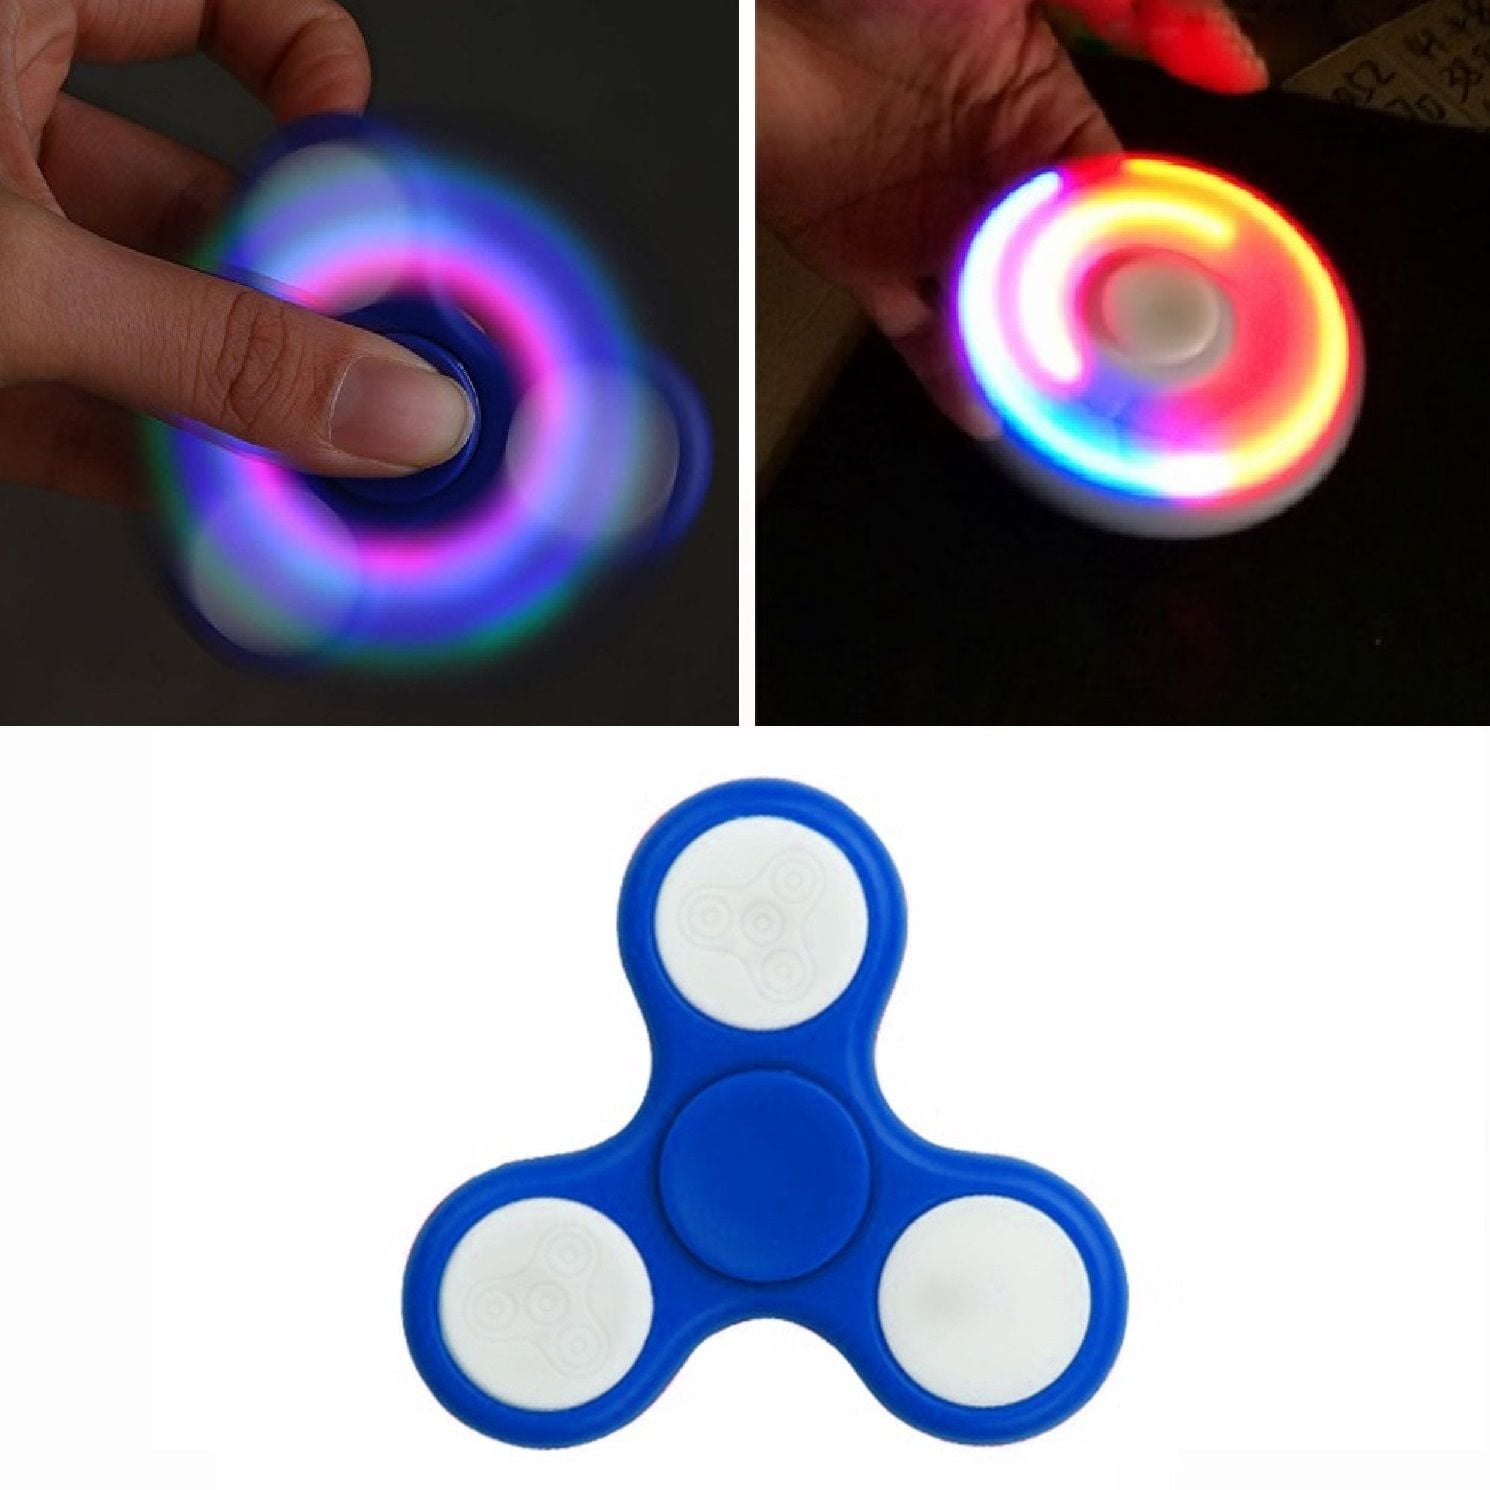 Phomnd Programmable LED Lighting Customizable Smart Spinner Tri Triangle Hand Finger Fidget Desk Toy Gift with APP EDC ADHD ADD Focus Widget Pocket Relieve Stress Anxiety Rechargeable USB Cable